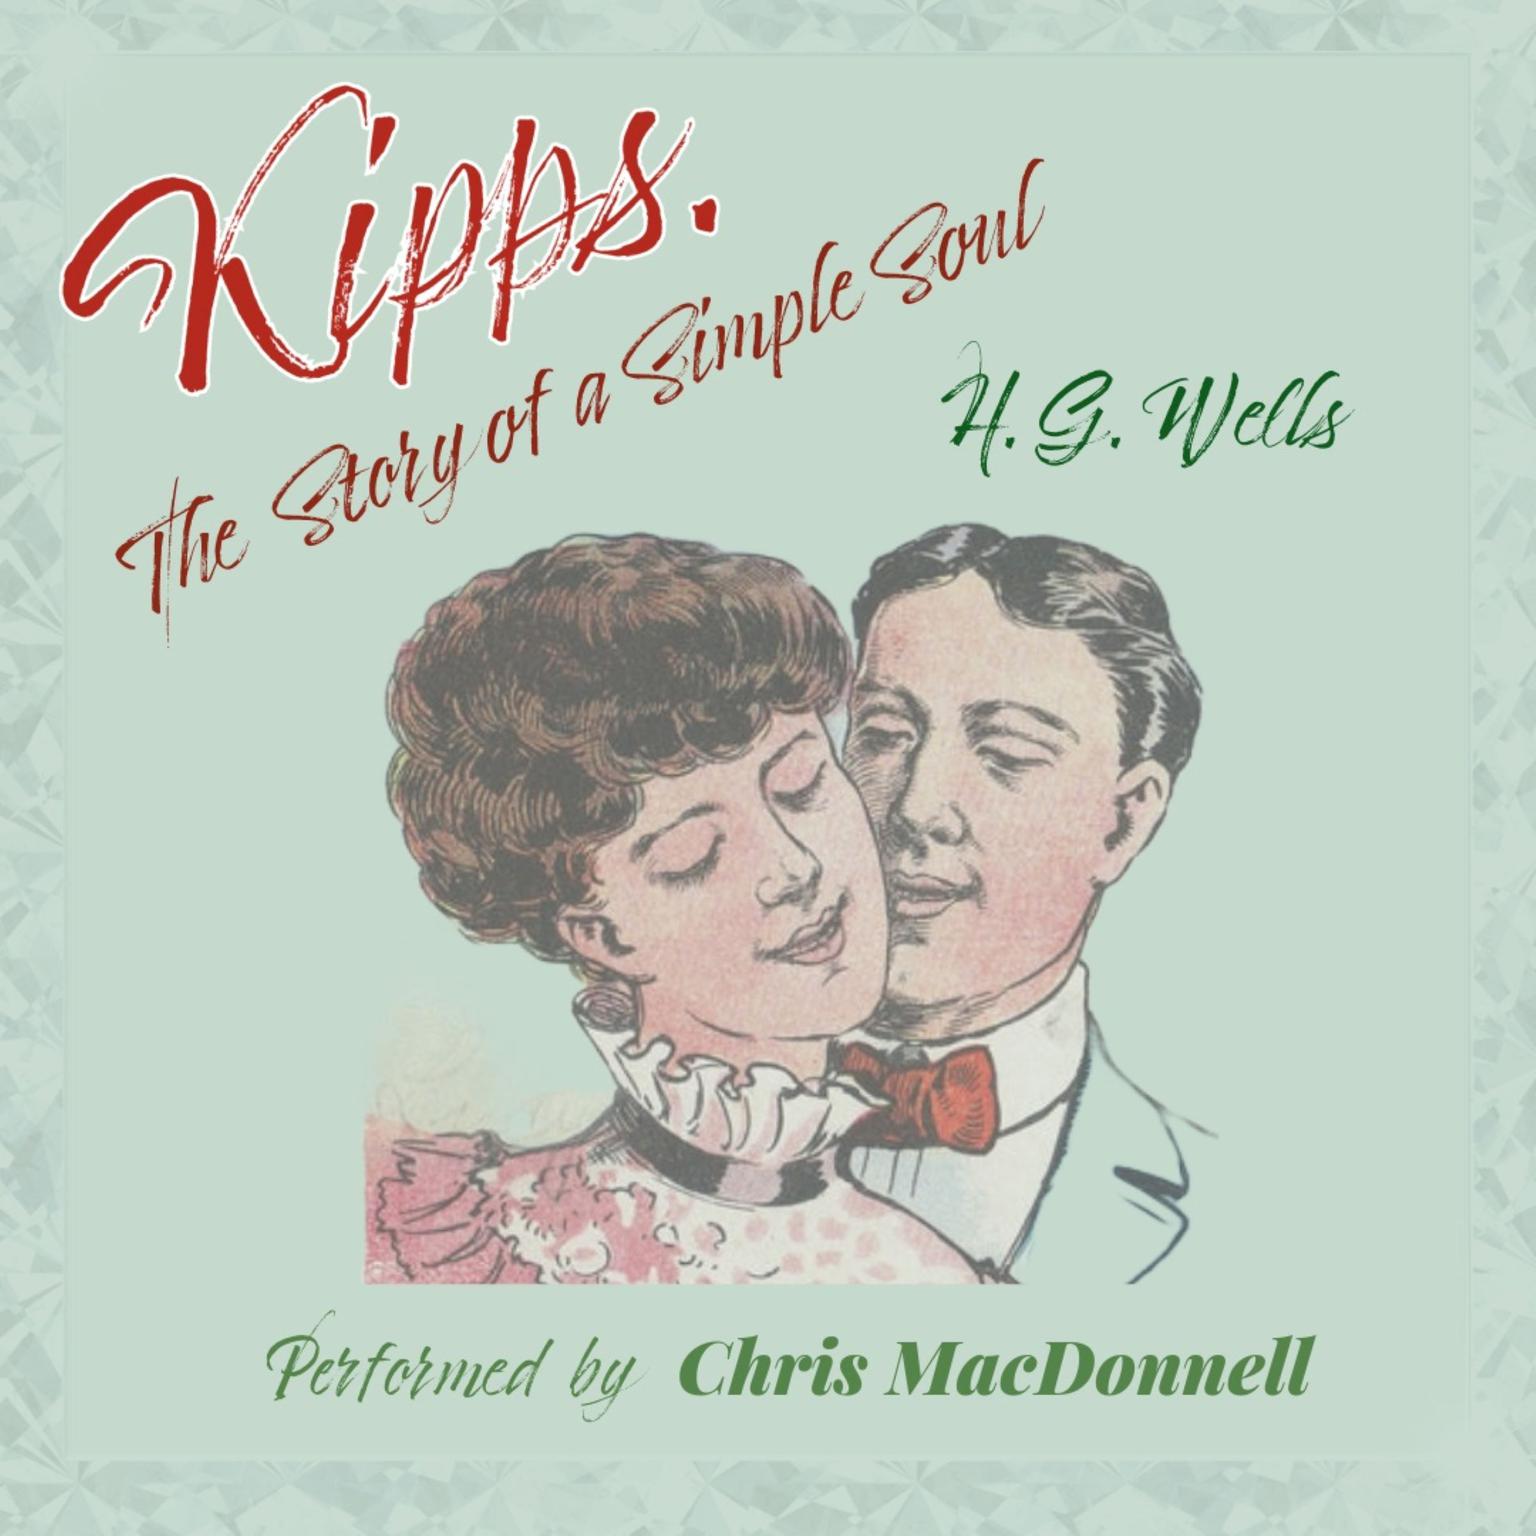 Kipps: The Story of a Simple Soul  Audiobook, by H. G. Wells